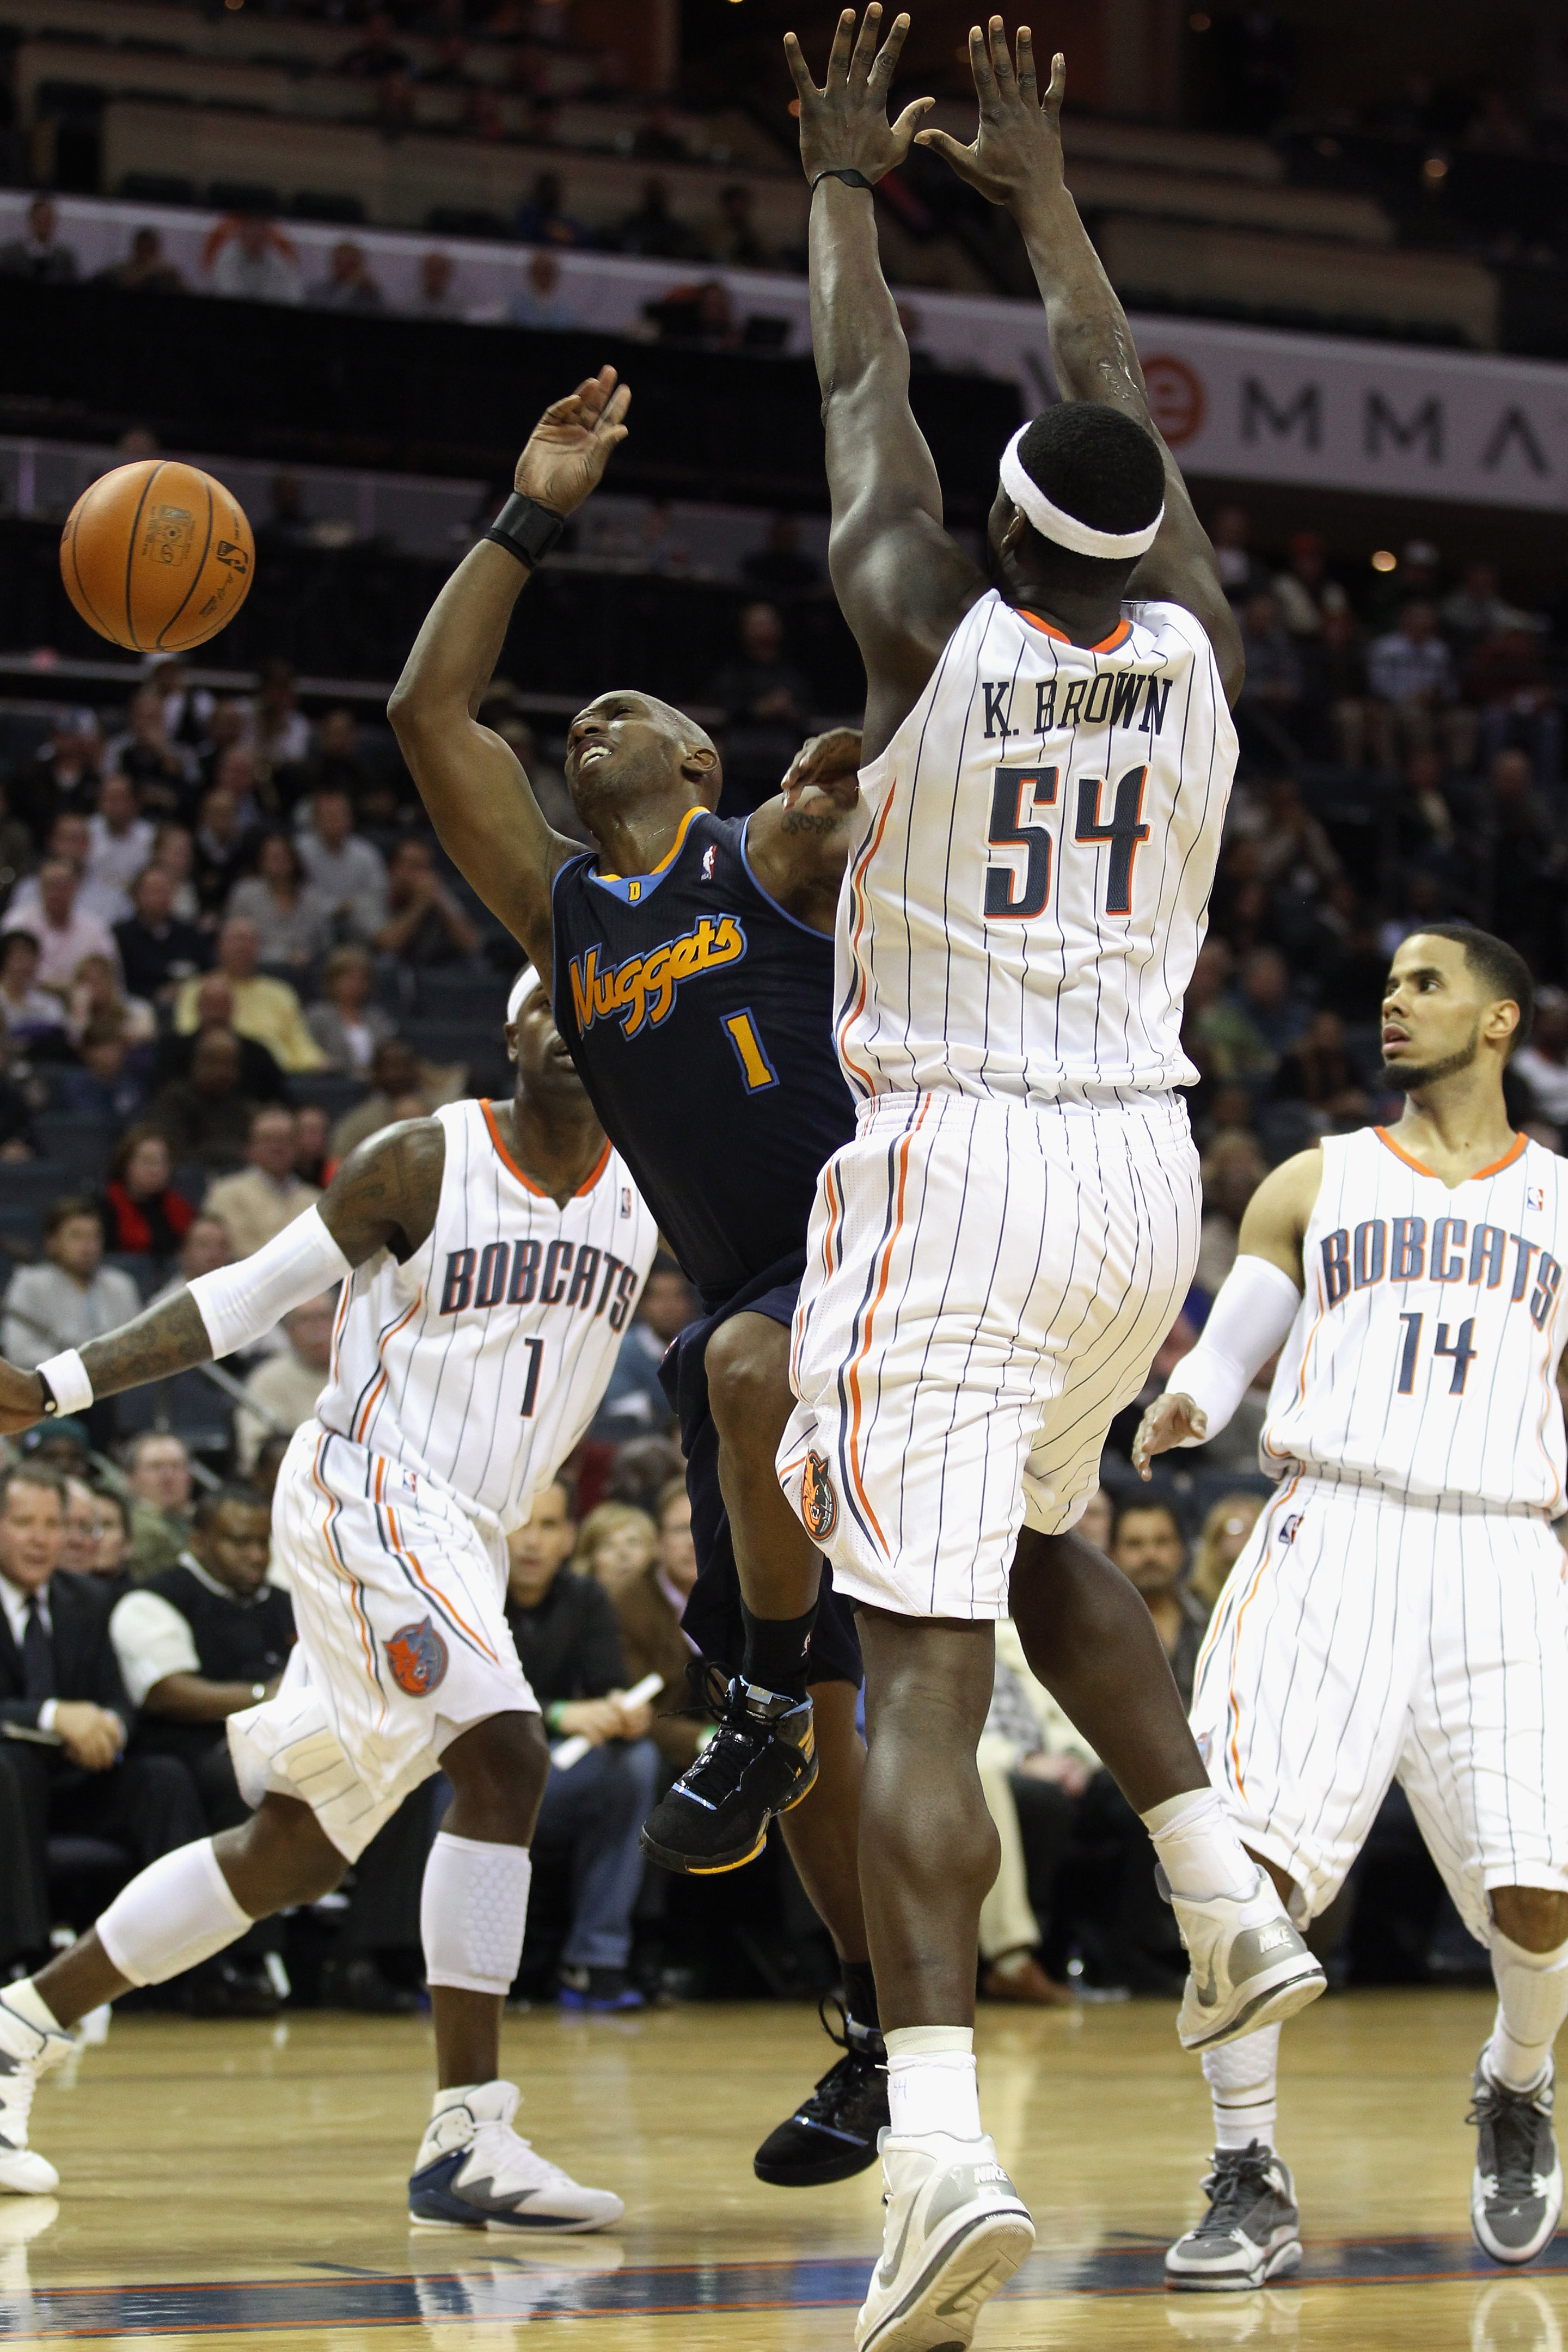 Kwame Brown signs with NBA's Bobcats 